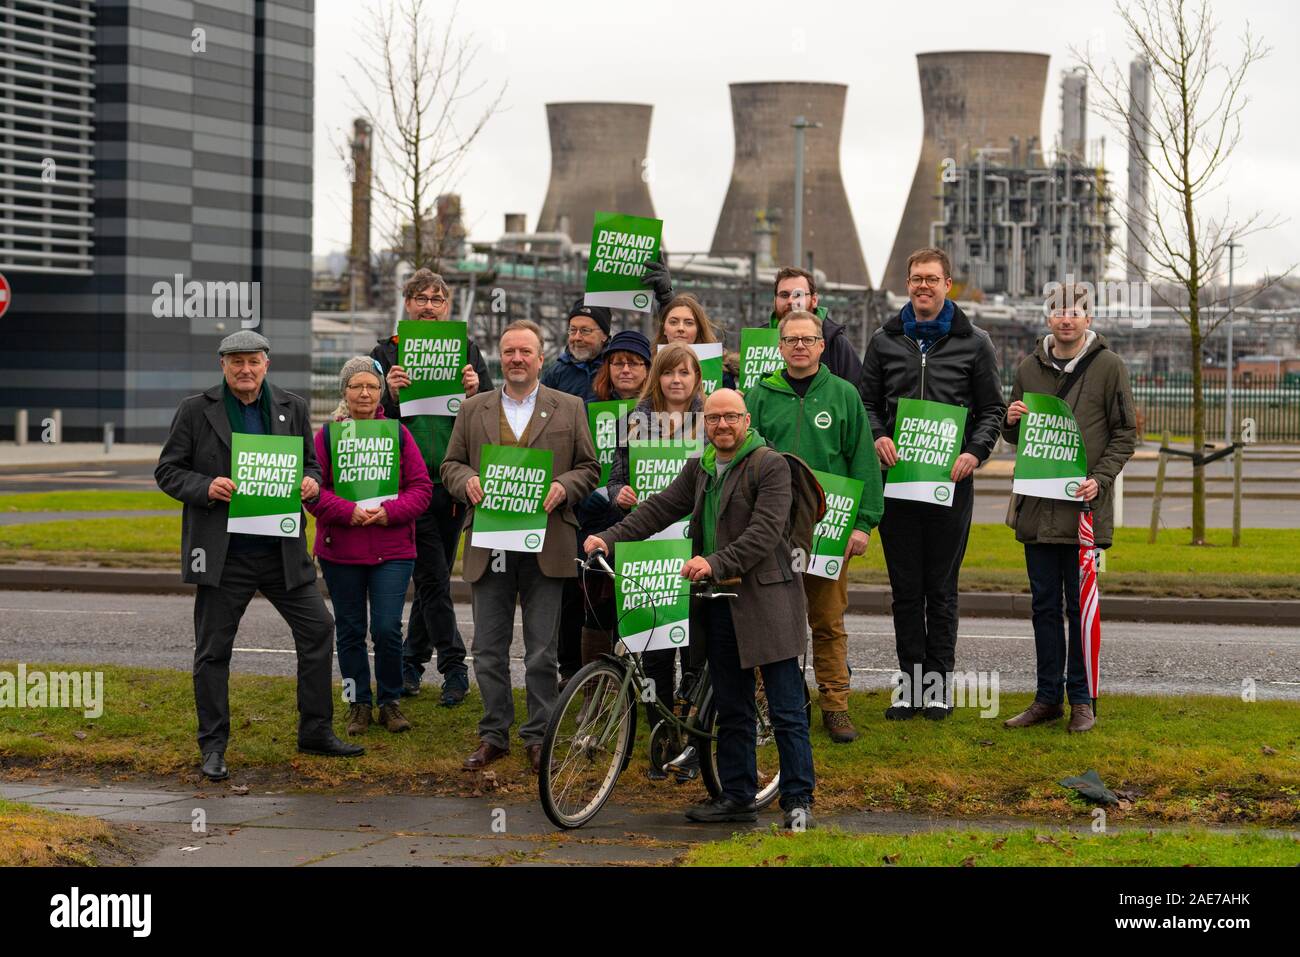 Grangemouth, Scotland, UK. 7th December 2019. Scottish Greens co-leader Patrick Harvie joined Linlithgow and East Falkirk candidate Gillian Mackay for a demonstration outside INEOS offices in Grangemouth. The refinery operated there by INEOS is Scotland’s biggest polluter according to the Greens. The Scottish Greens are calling for the end of shale gas imports, which bring fracked gas from the US to Grangemouth. Iain Masterton/Alamy Live News Stock Photo